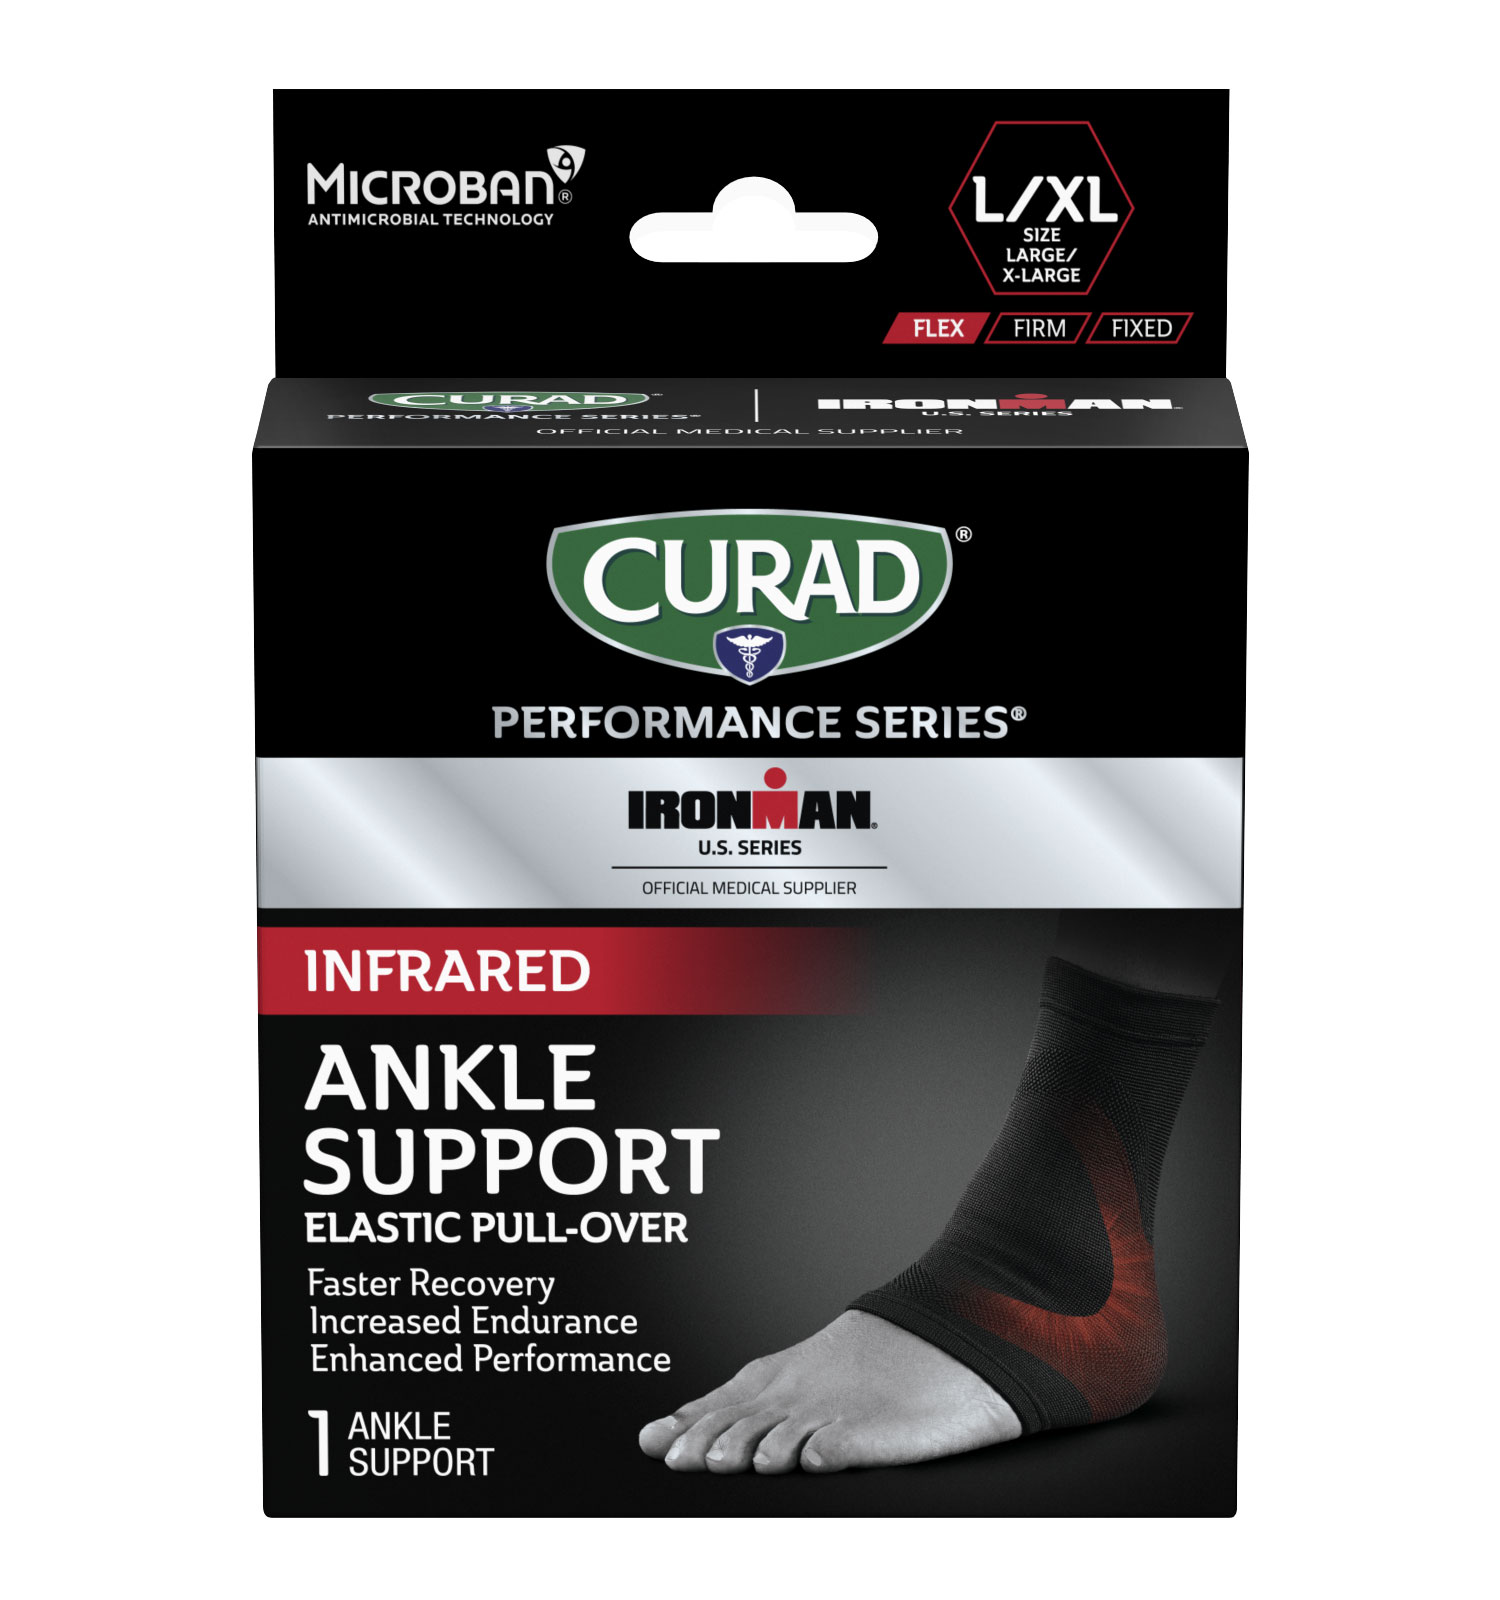 CURAD Performance Series IRONMAN Infrared Ankle Support, Elastic,  Large/X-Large, 1 count